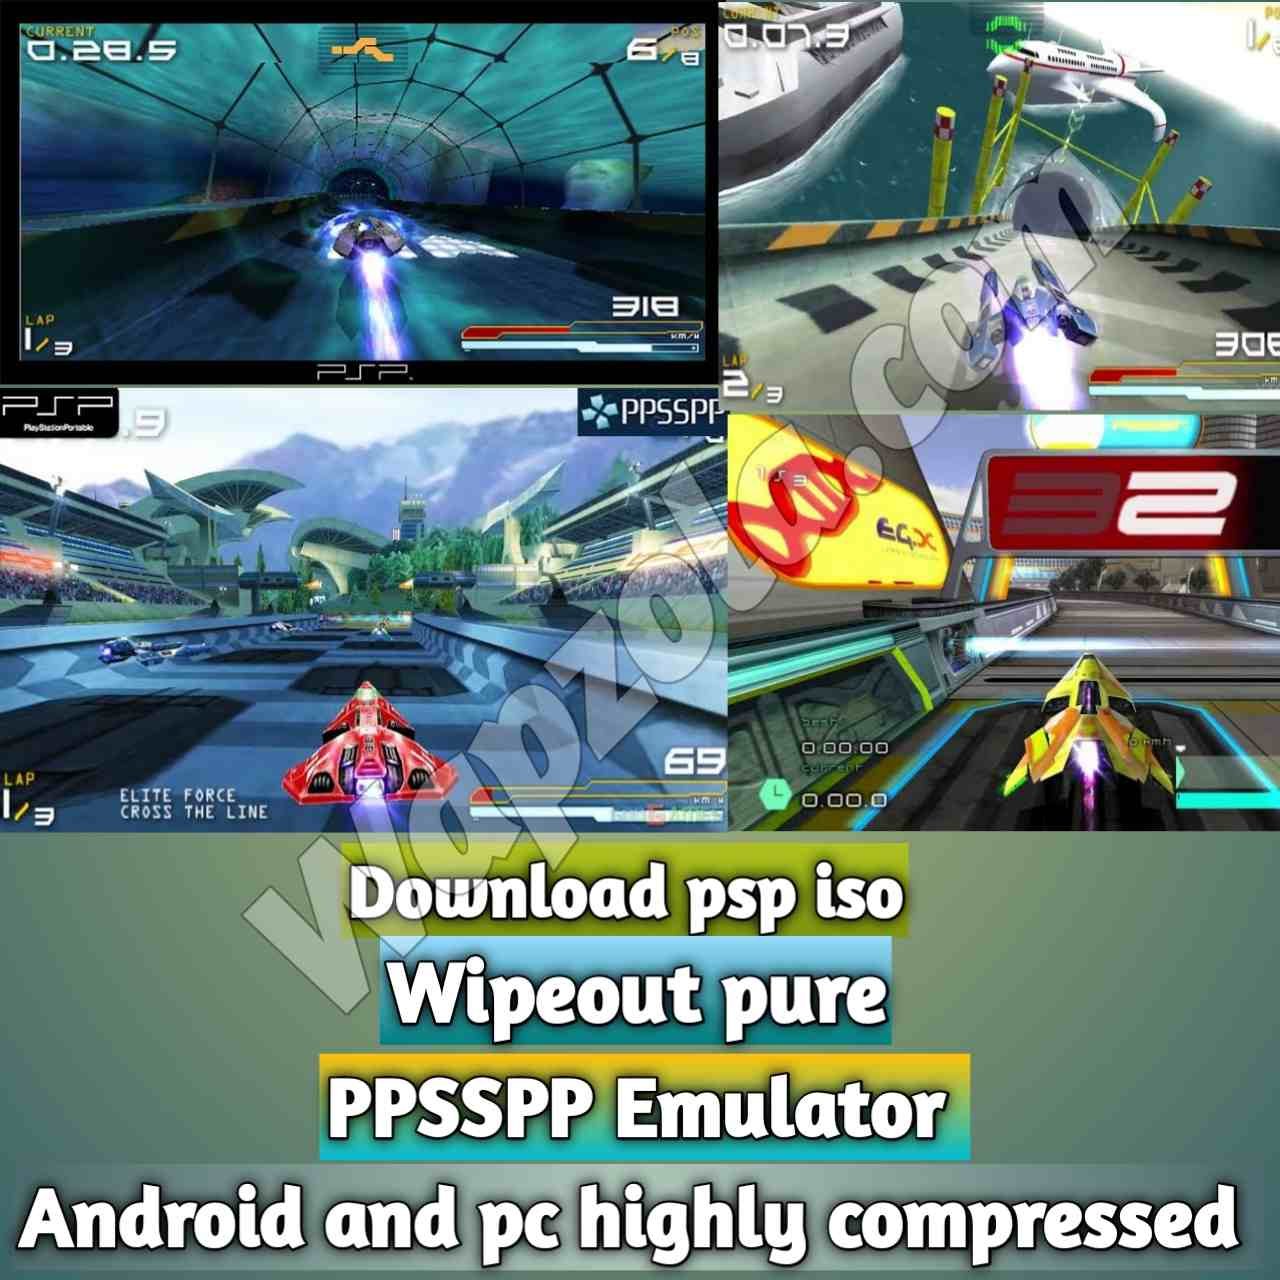 [Download] Wipeout pure iso ppsspp emulator – PSP APK Iso ROM highly compressed 100MB